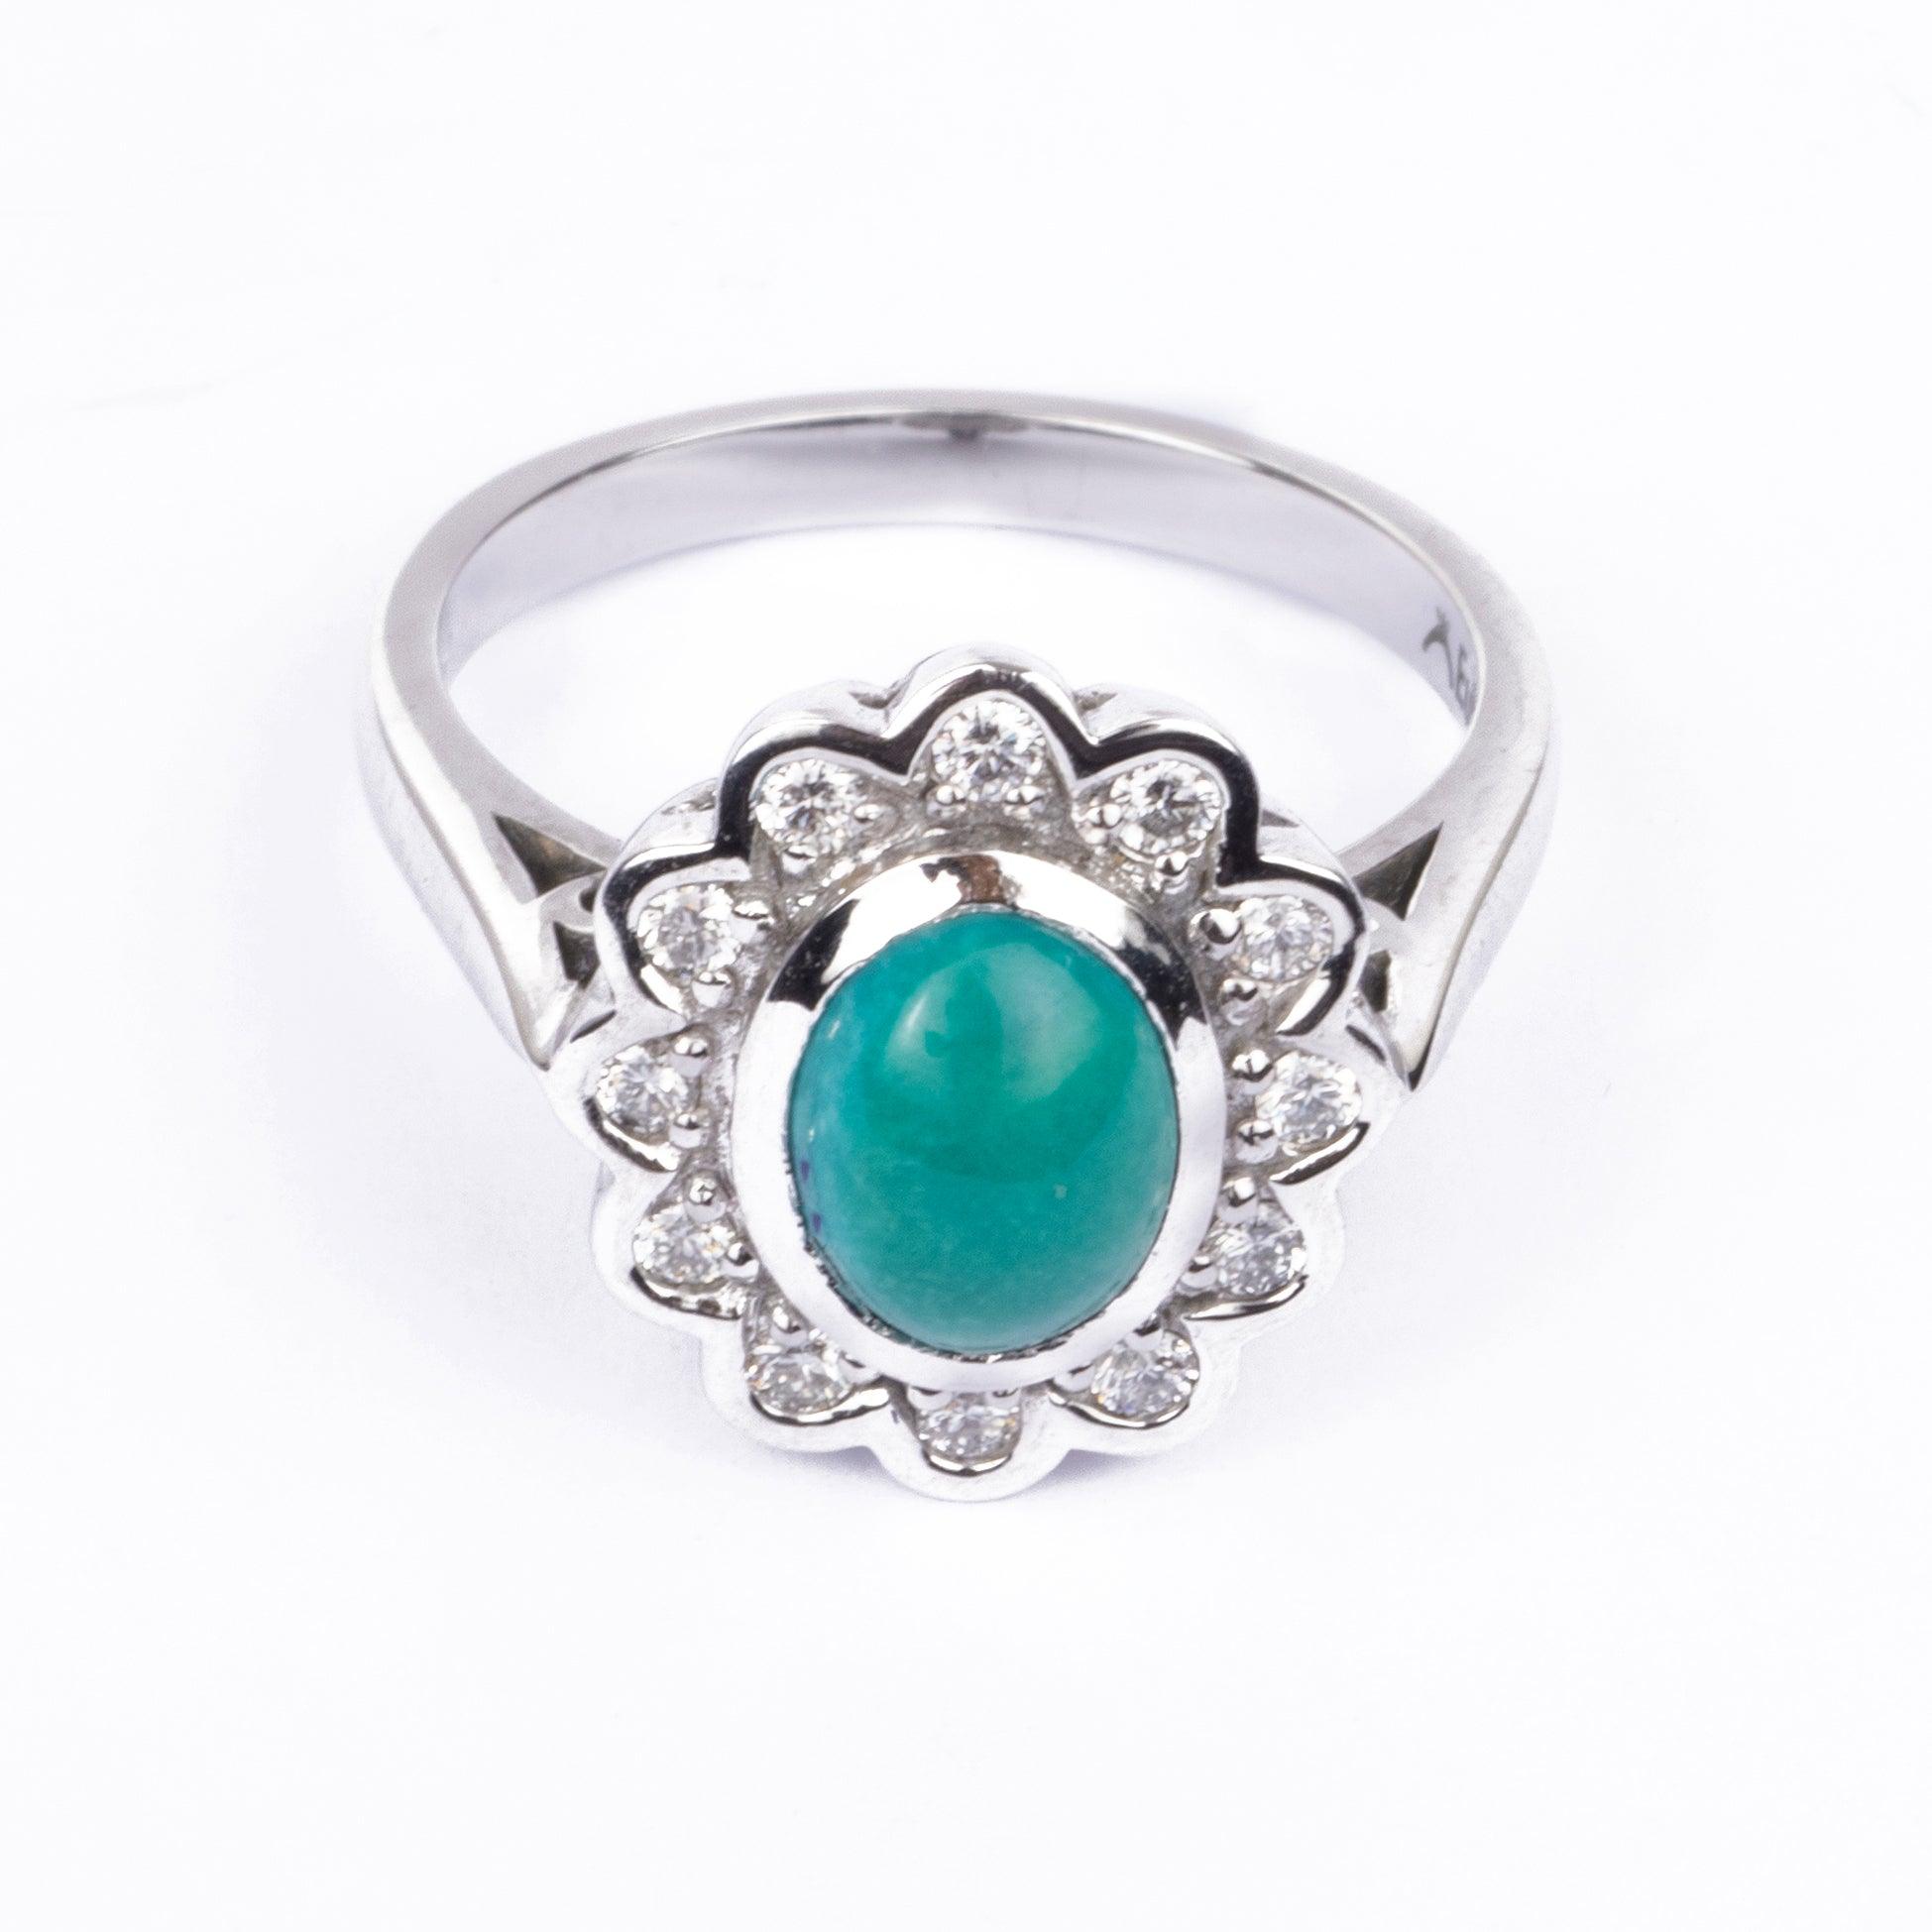 18ct White Gold Diamond and Turquoise Cocktail Ring LR-2971 - Minar Jewellers